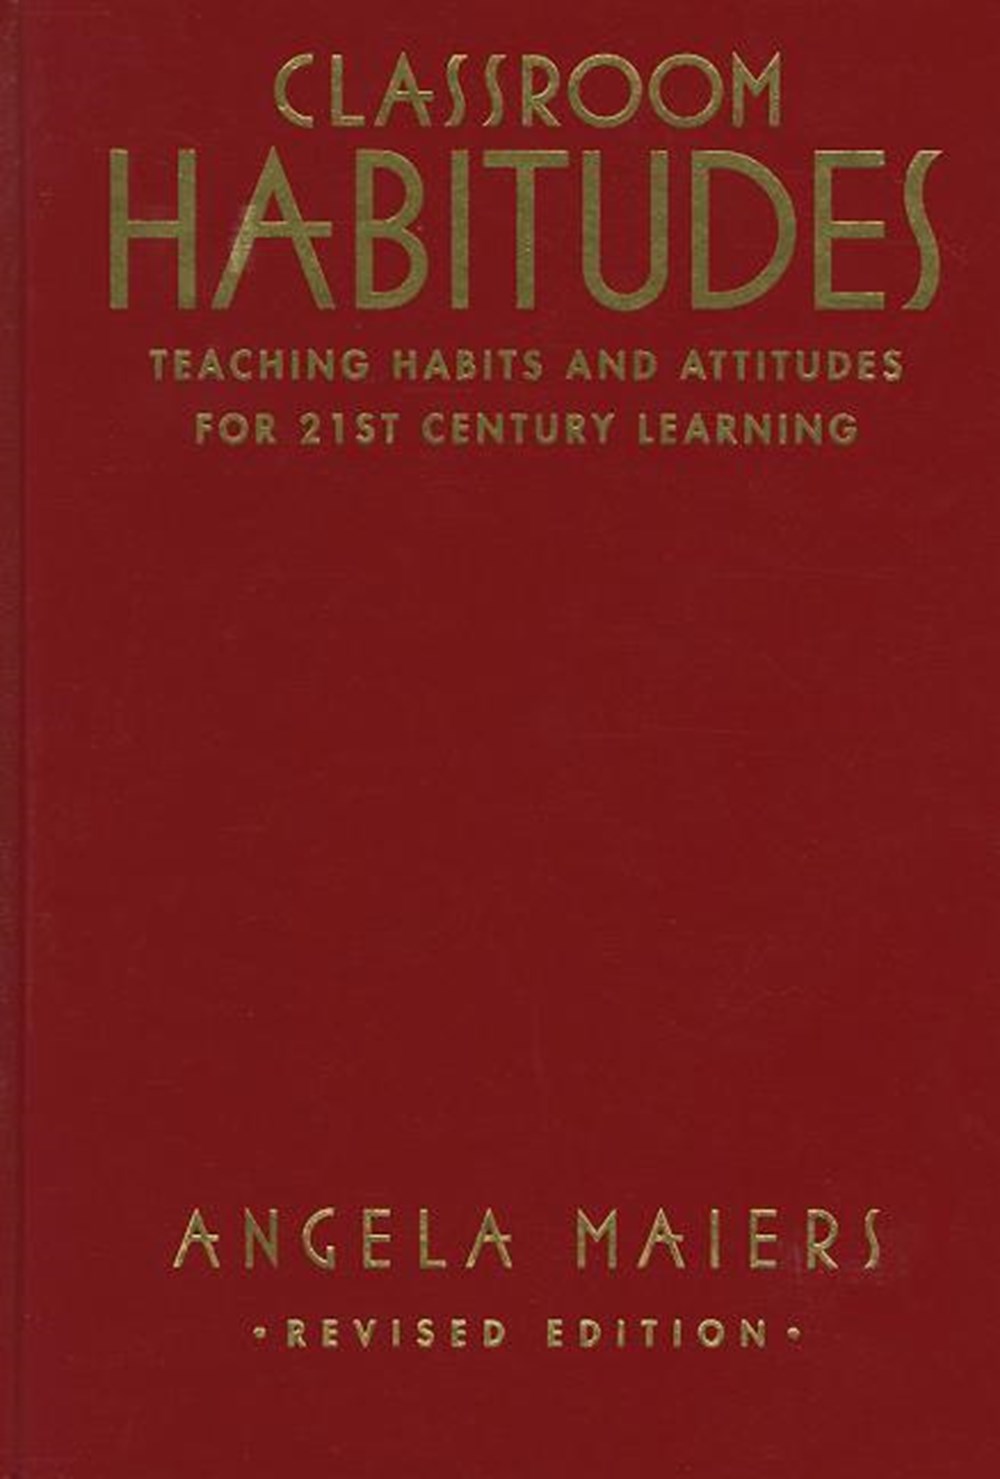 Classroom Habitudes: Teaching Learning Habits and Attitudes in 21st Century Classrooms (Revised) (Re